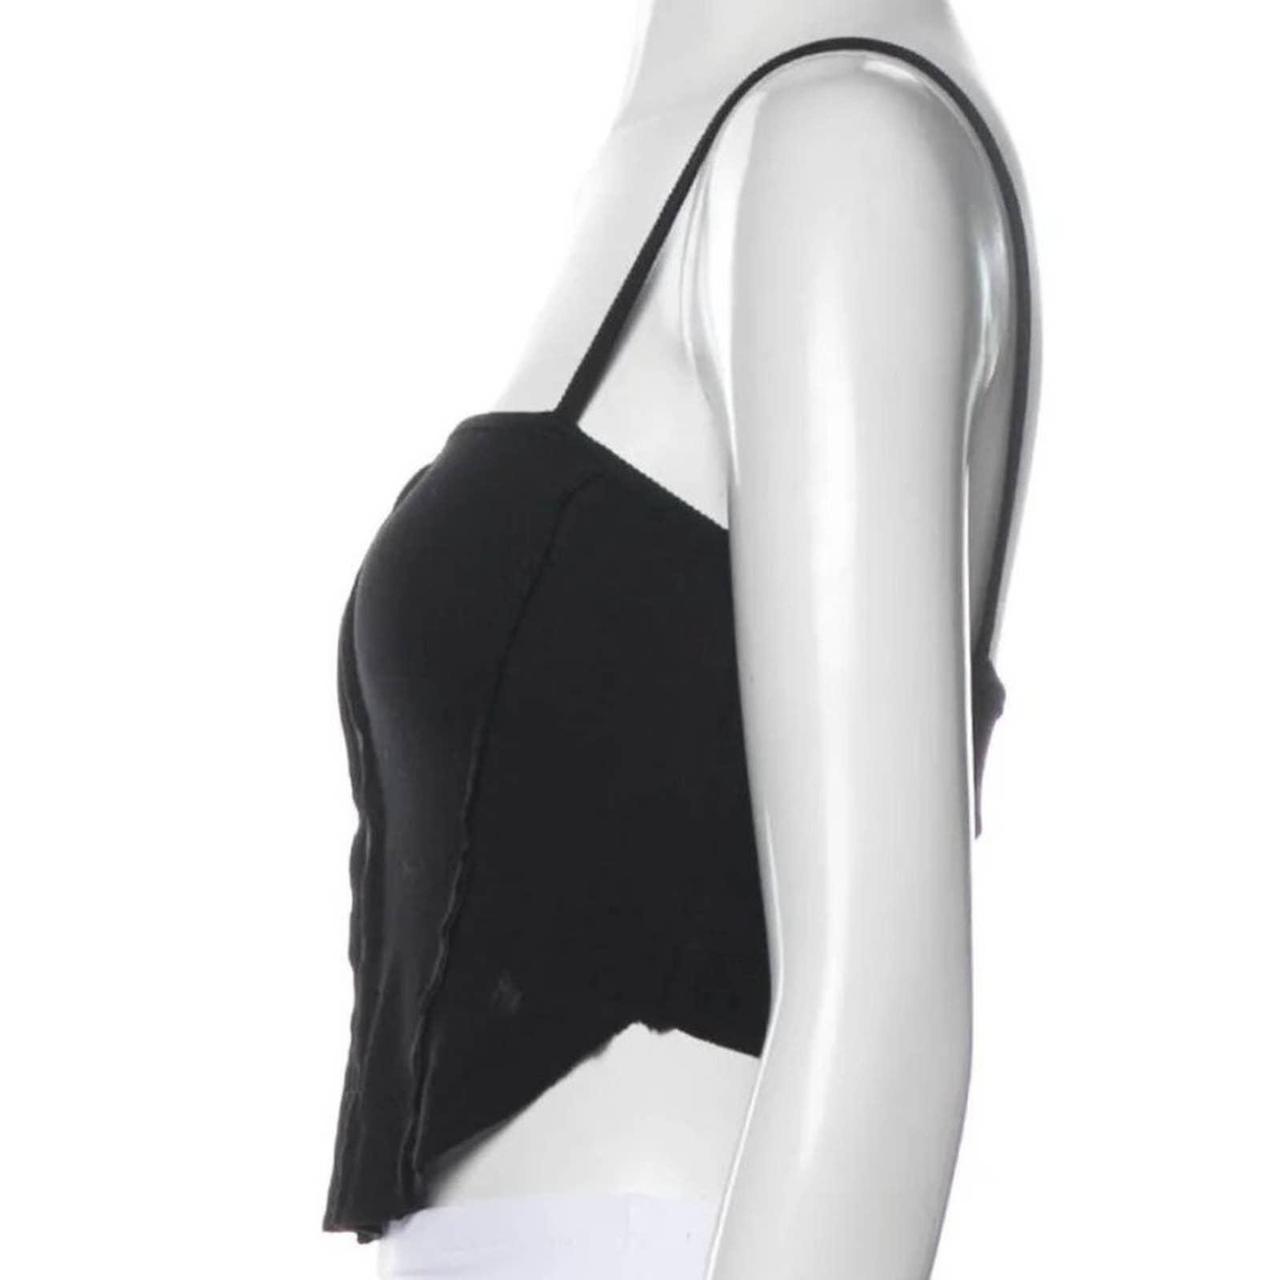 Product Image 3 - Description:
Atoir Crop Top
Black
Sleeveless with Square